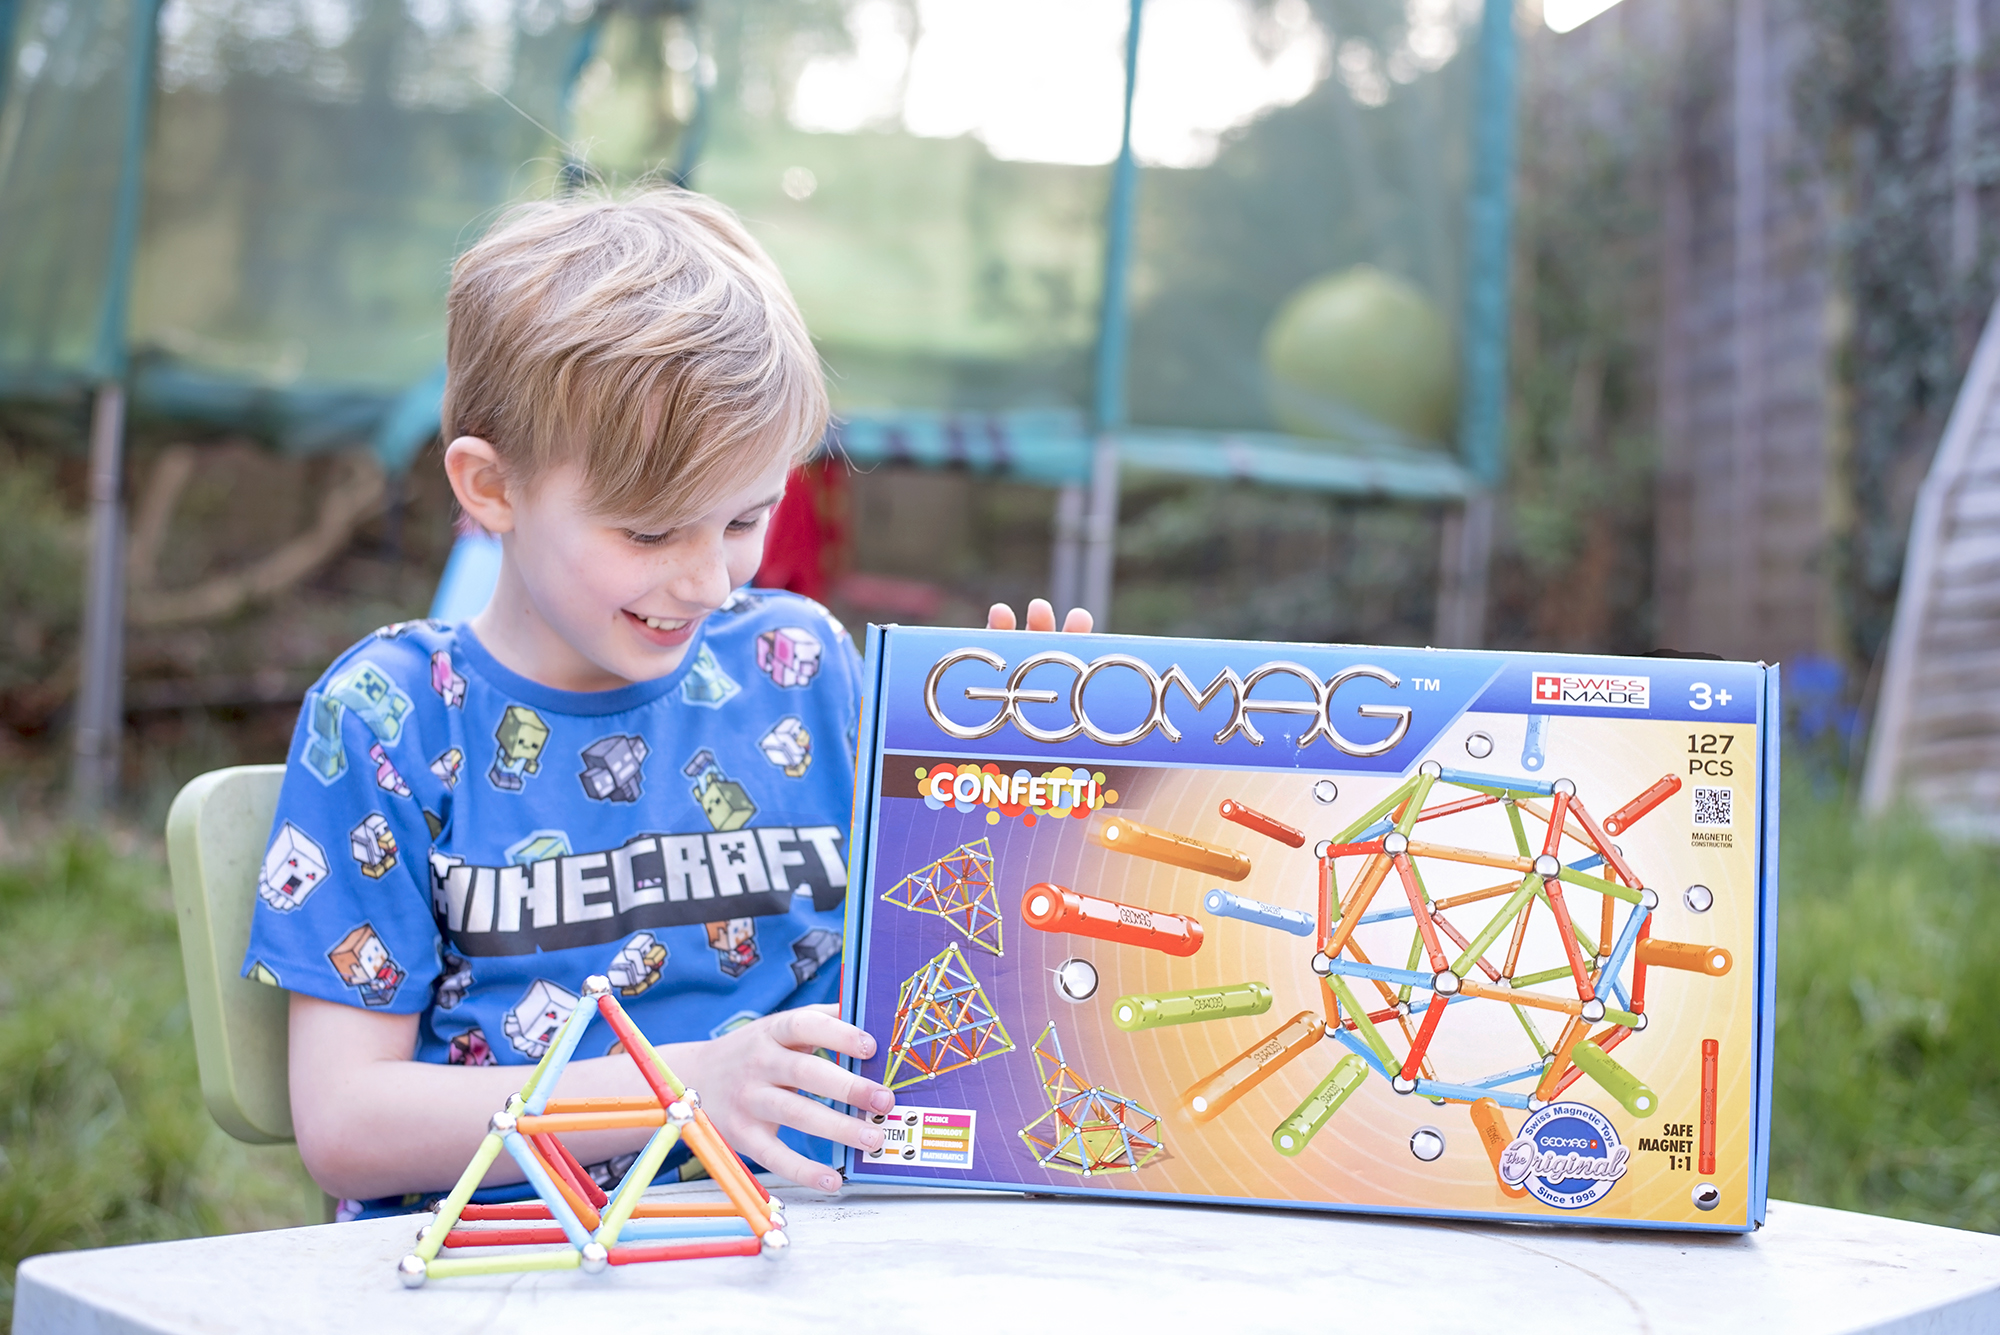 GEOMAG CONFETTI GIVEAWAY